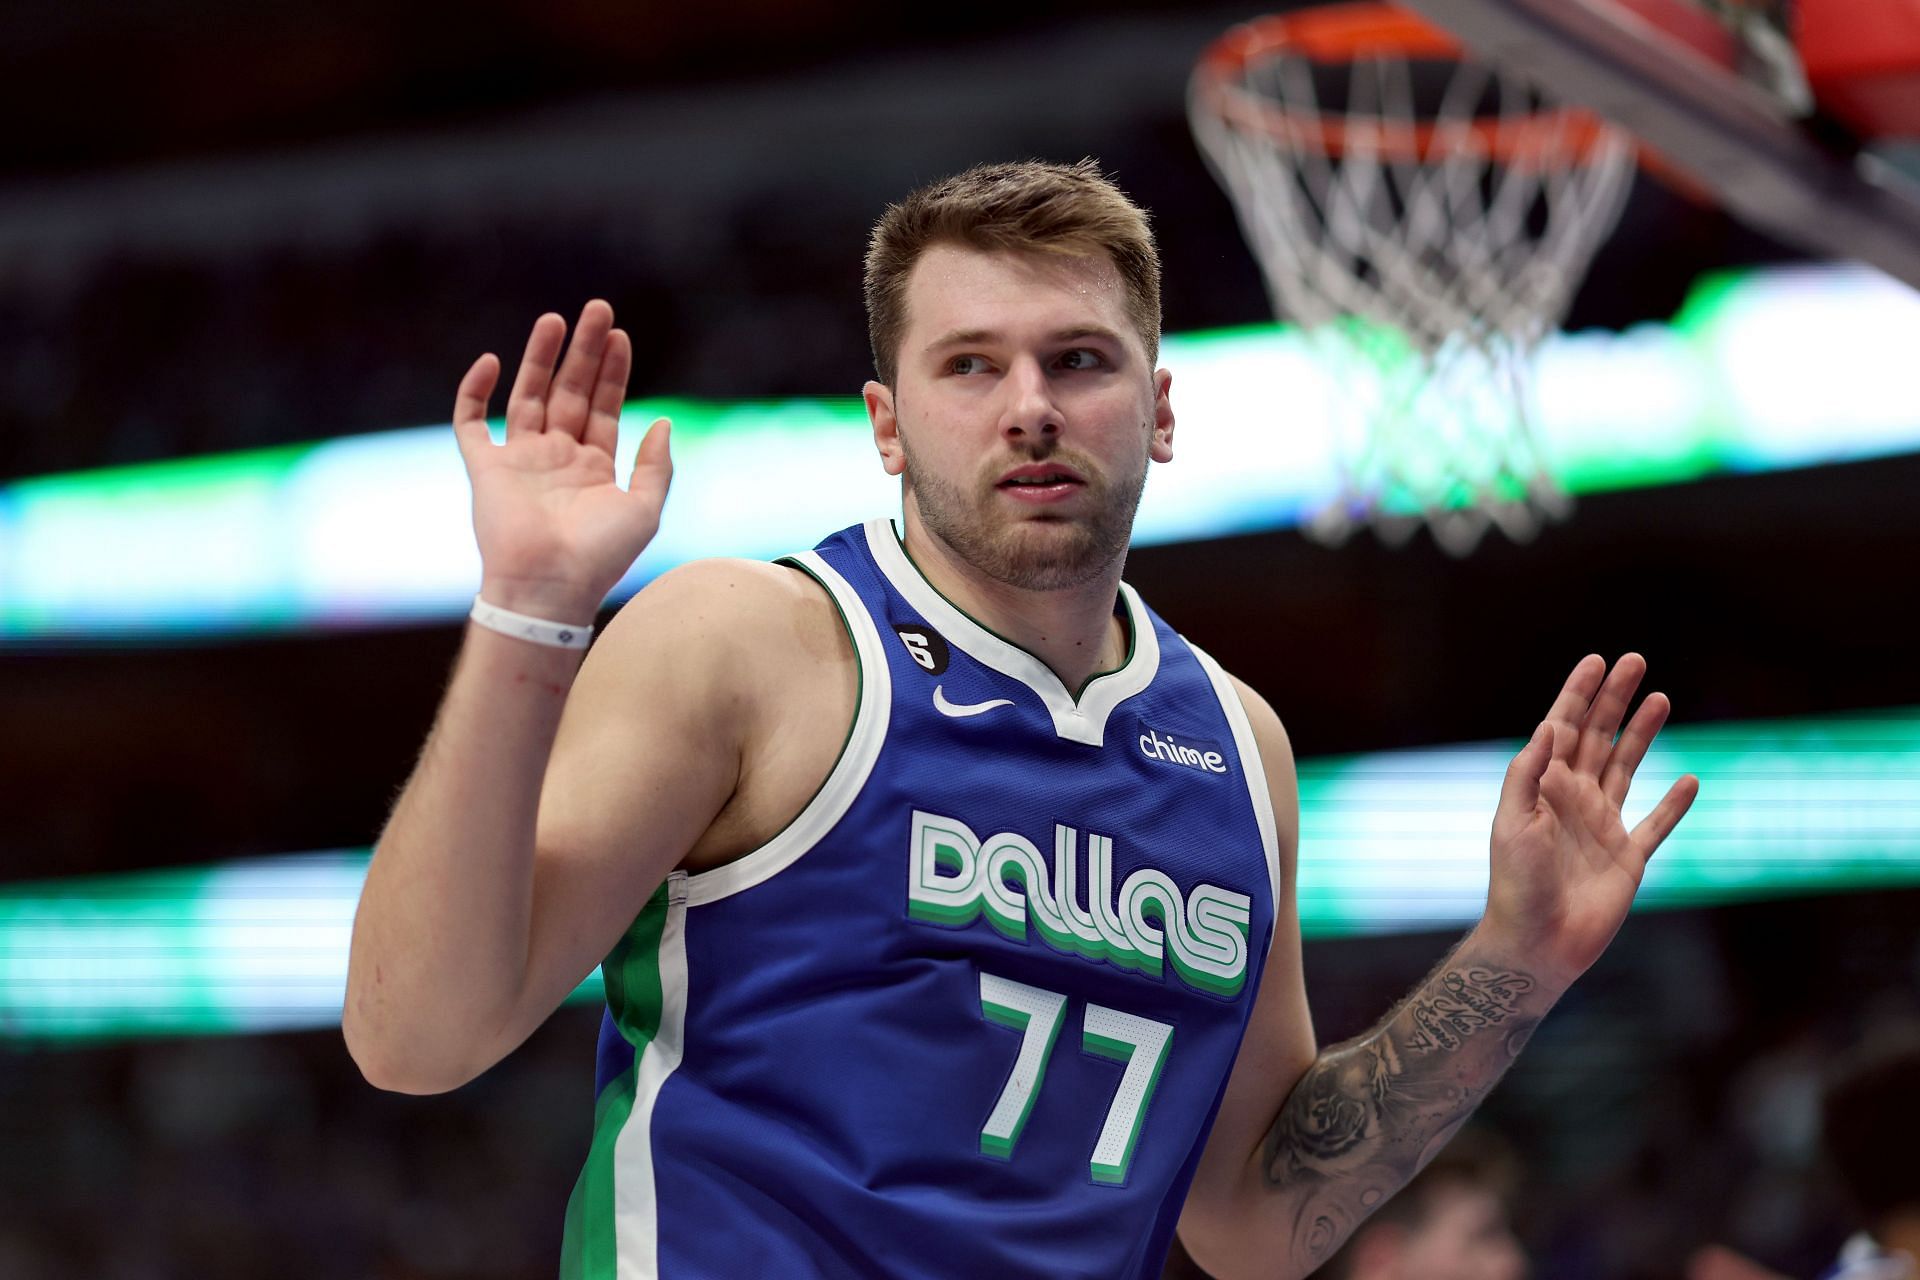 Watch: When Luka Doncic wore his signature shoe at Jordan Event in Paris